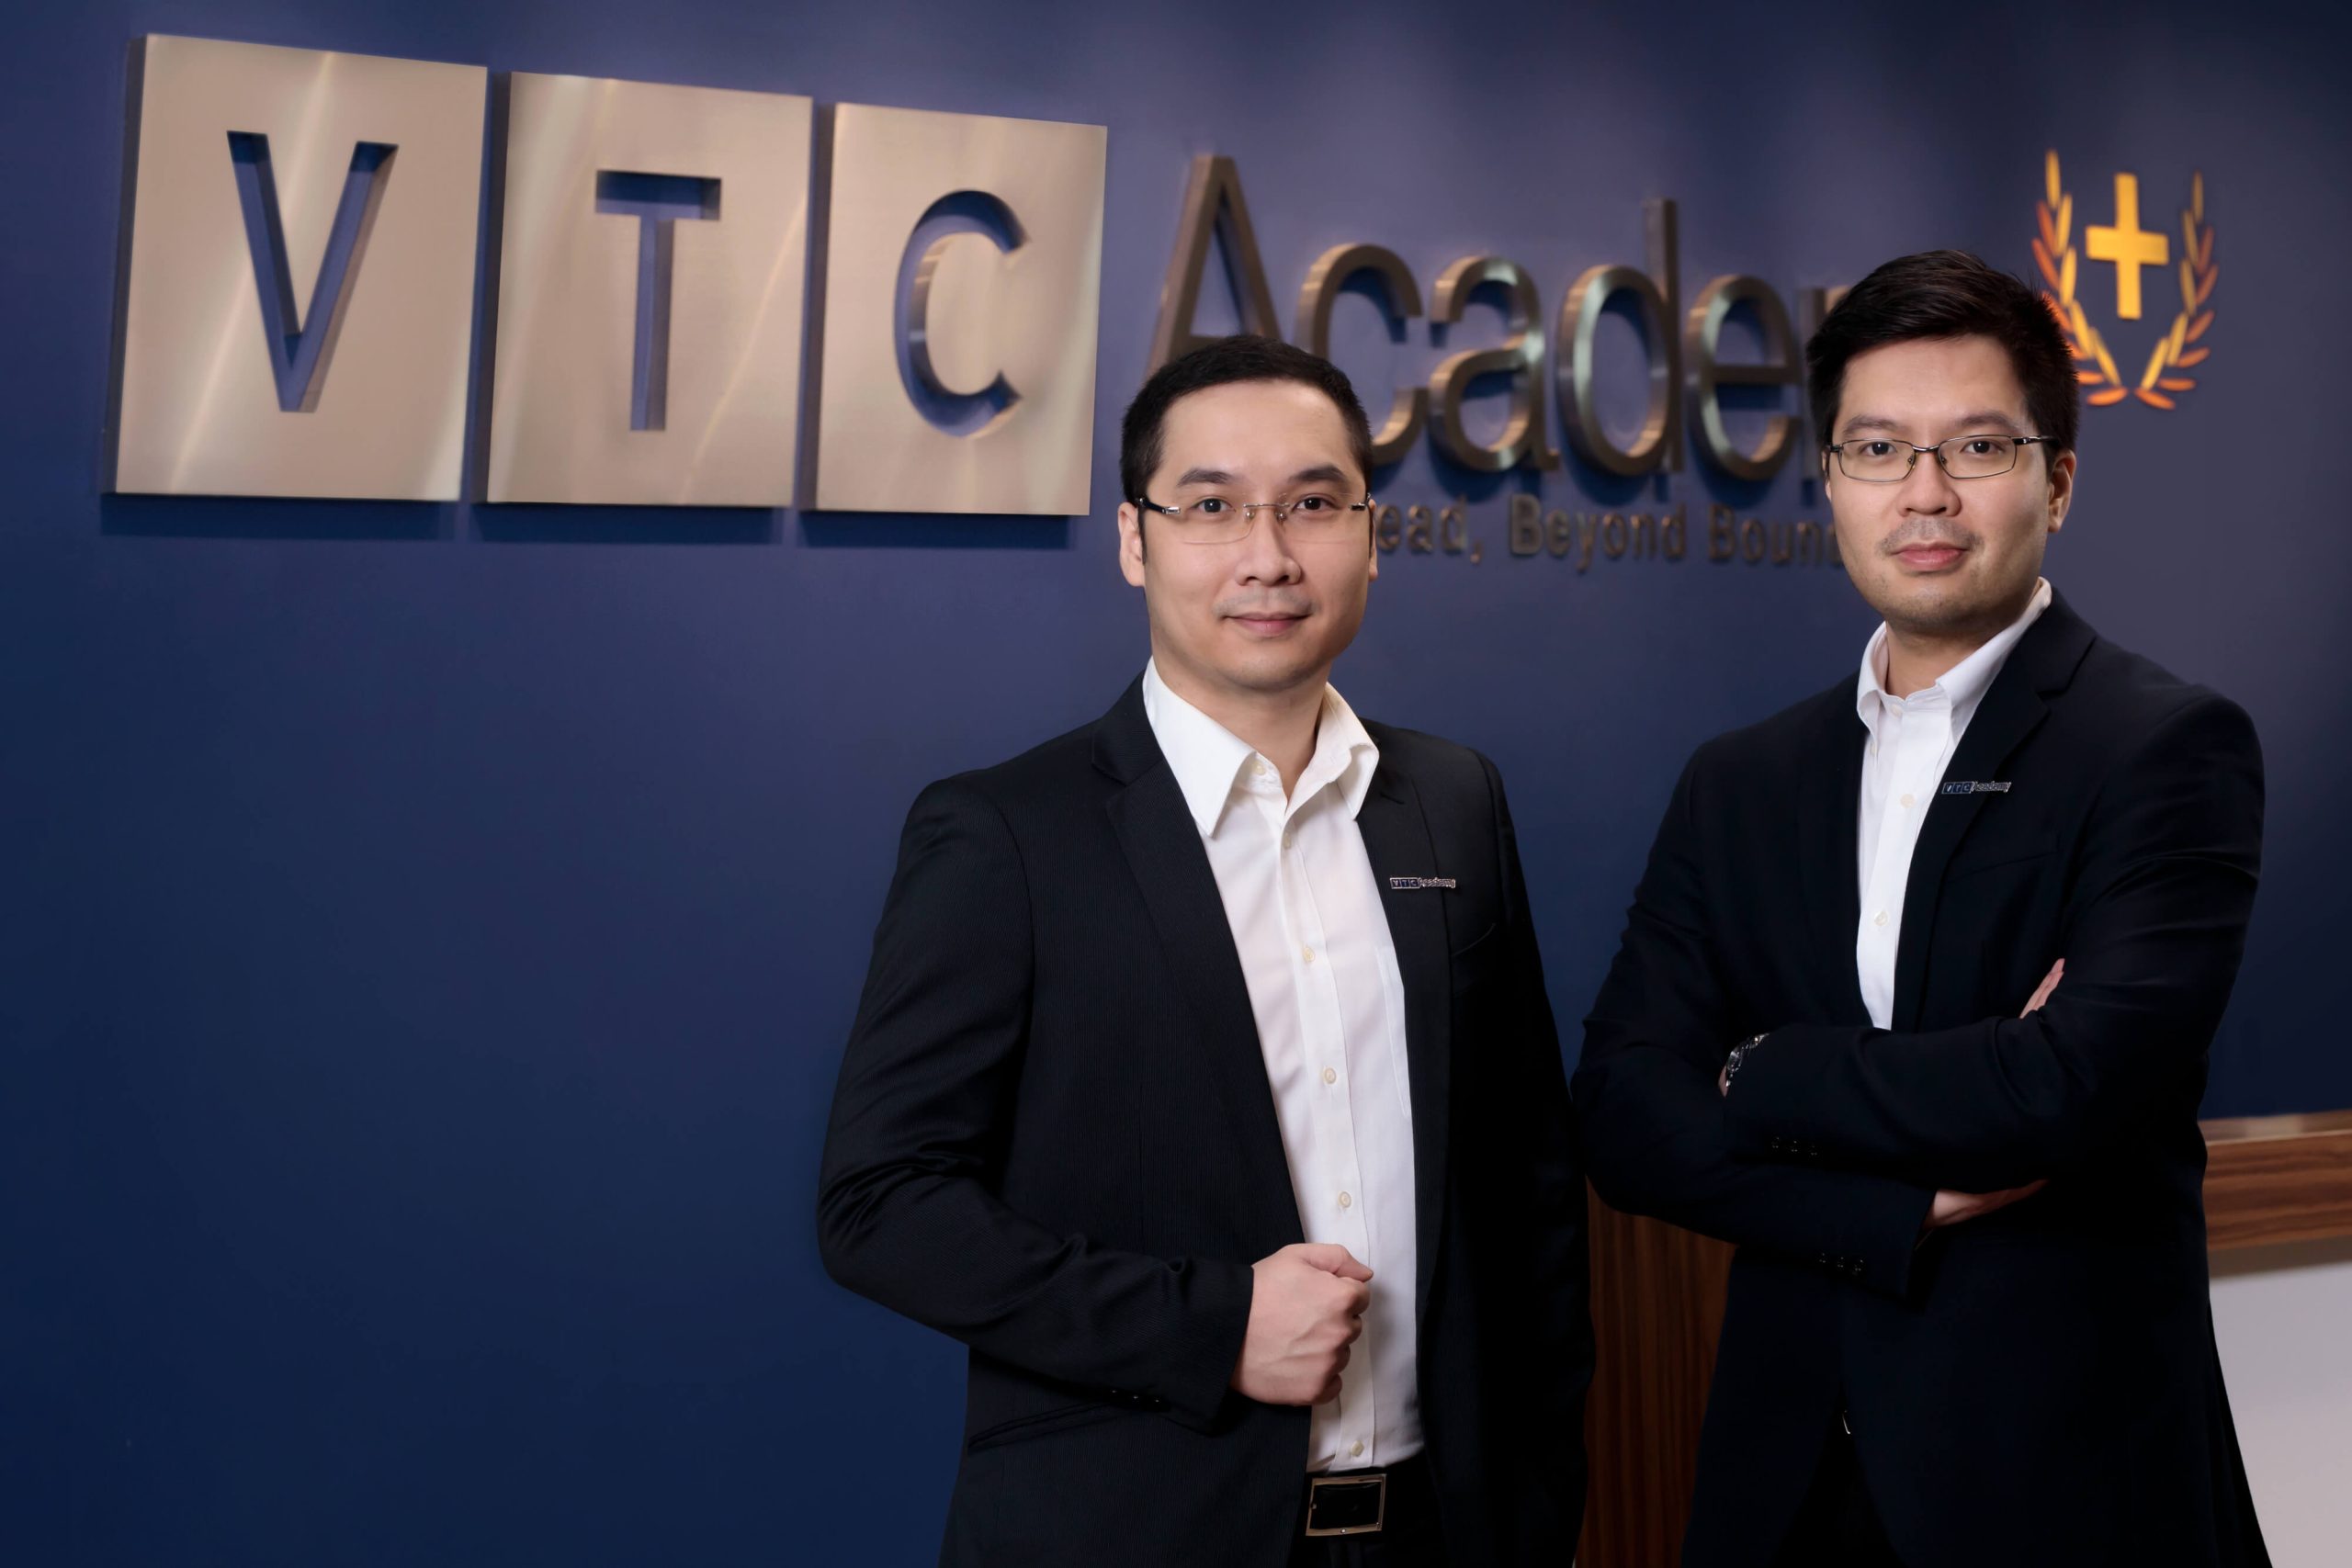 VTC Academy Aims to Raise 20 Million USD for the Development Plan of a Digital Academic Ecosystem in the Information Technology and Design Industry